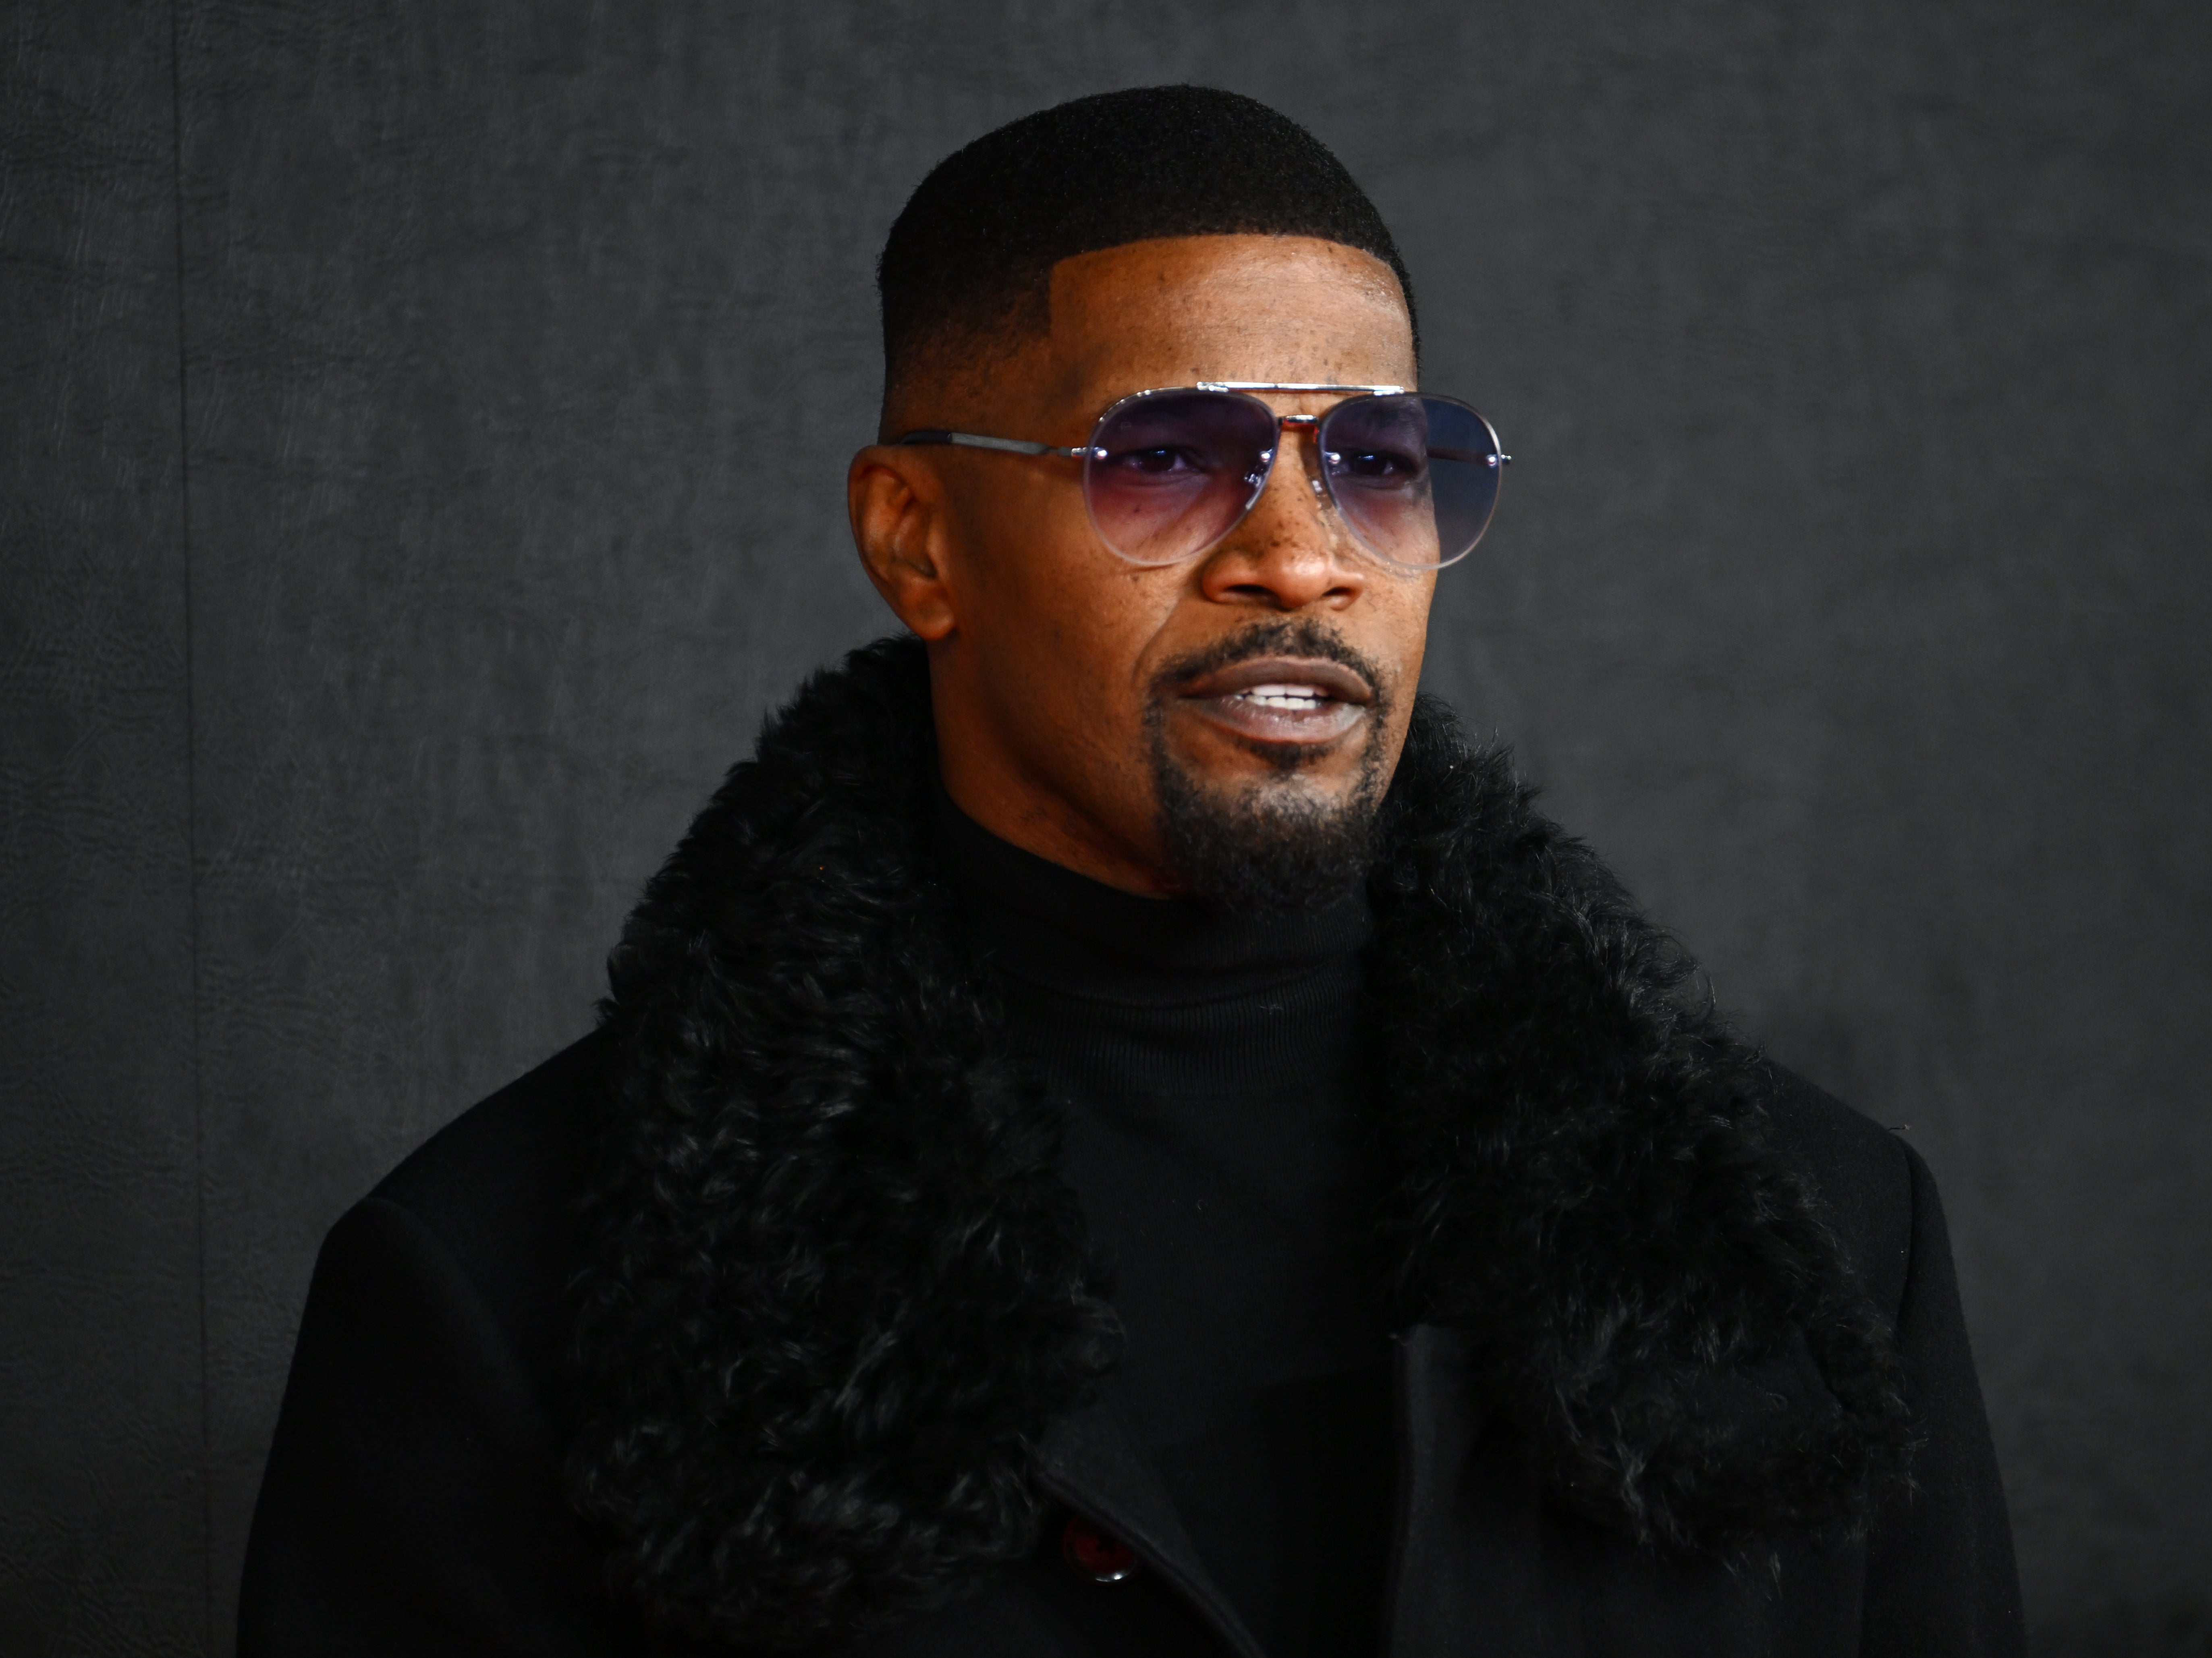 independent.co.uk - Meredith Clark - Jamie Foxx's rep addresses conspiracy Covid vaccine left actor 'paralyzed and blind'